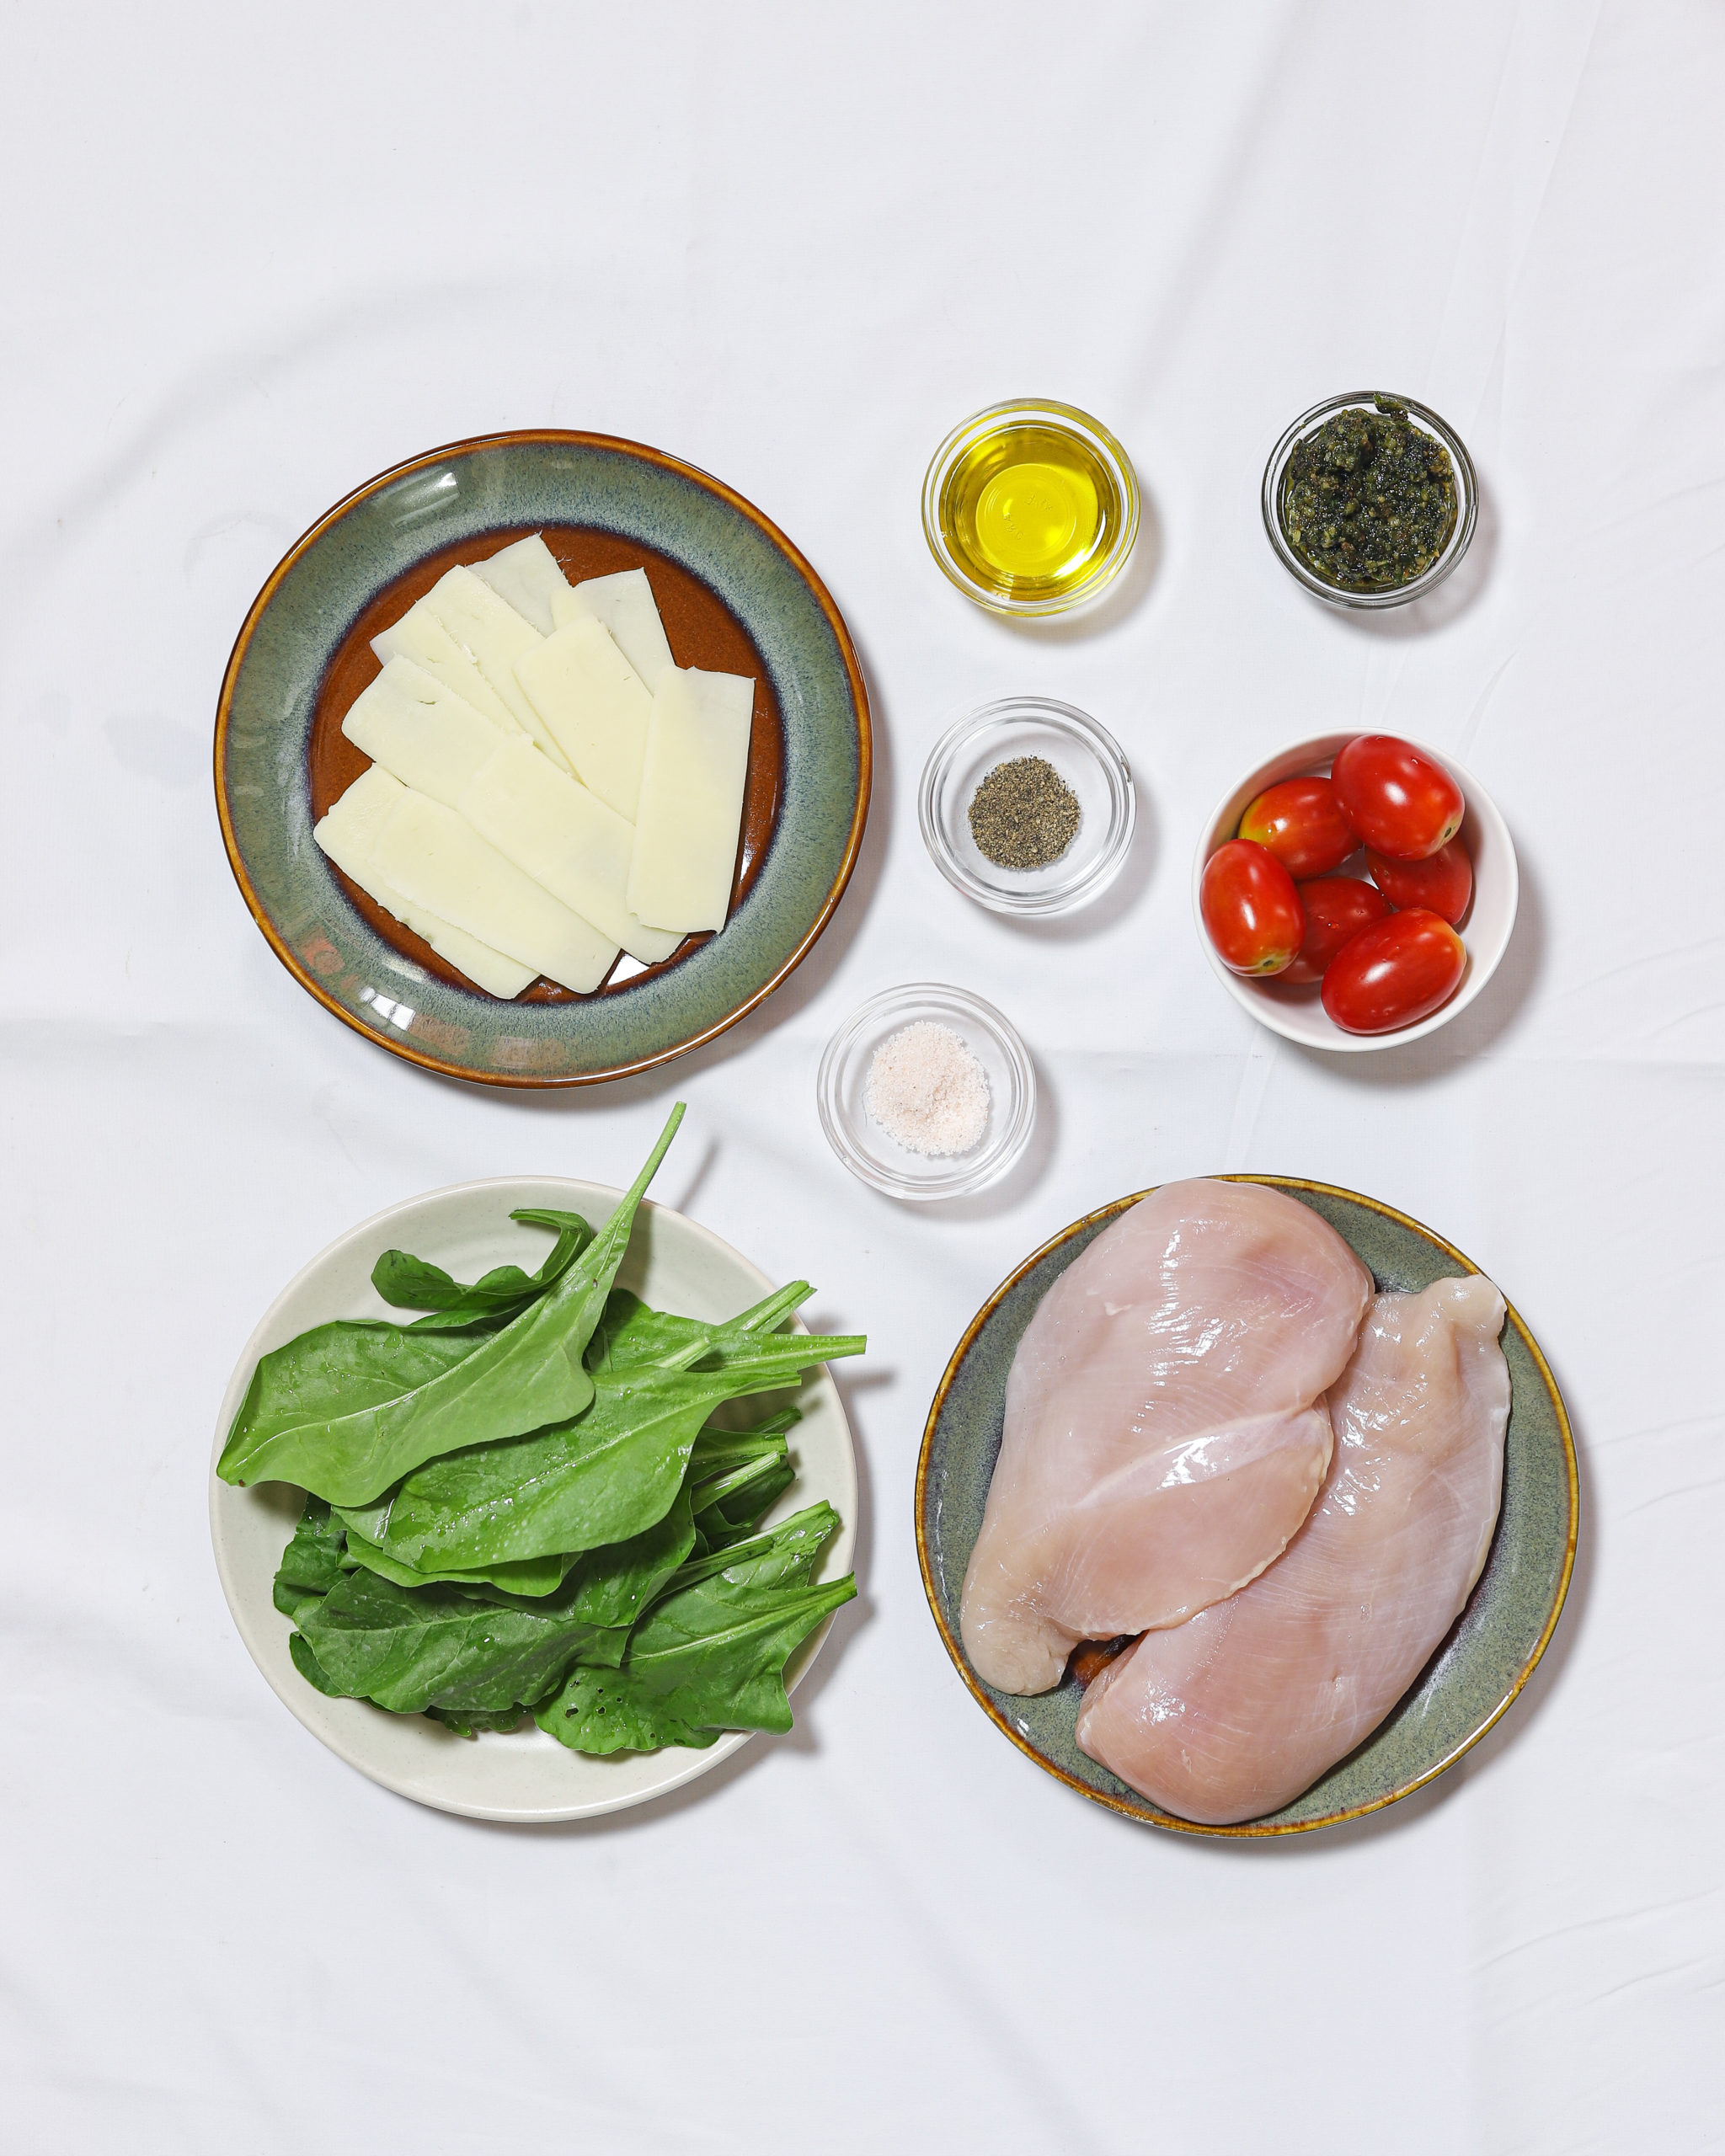 Ingredients on individual plates for stuffed chicken breasts on a white background.